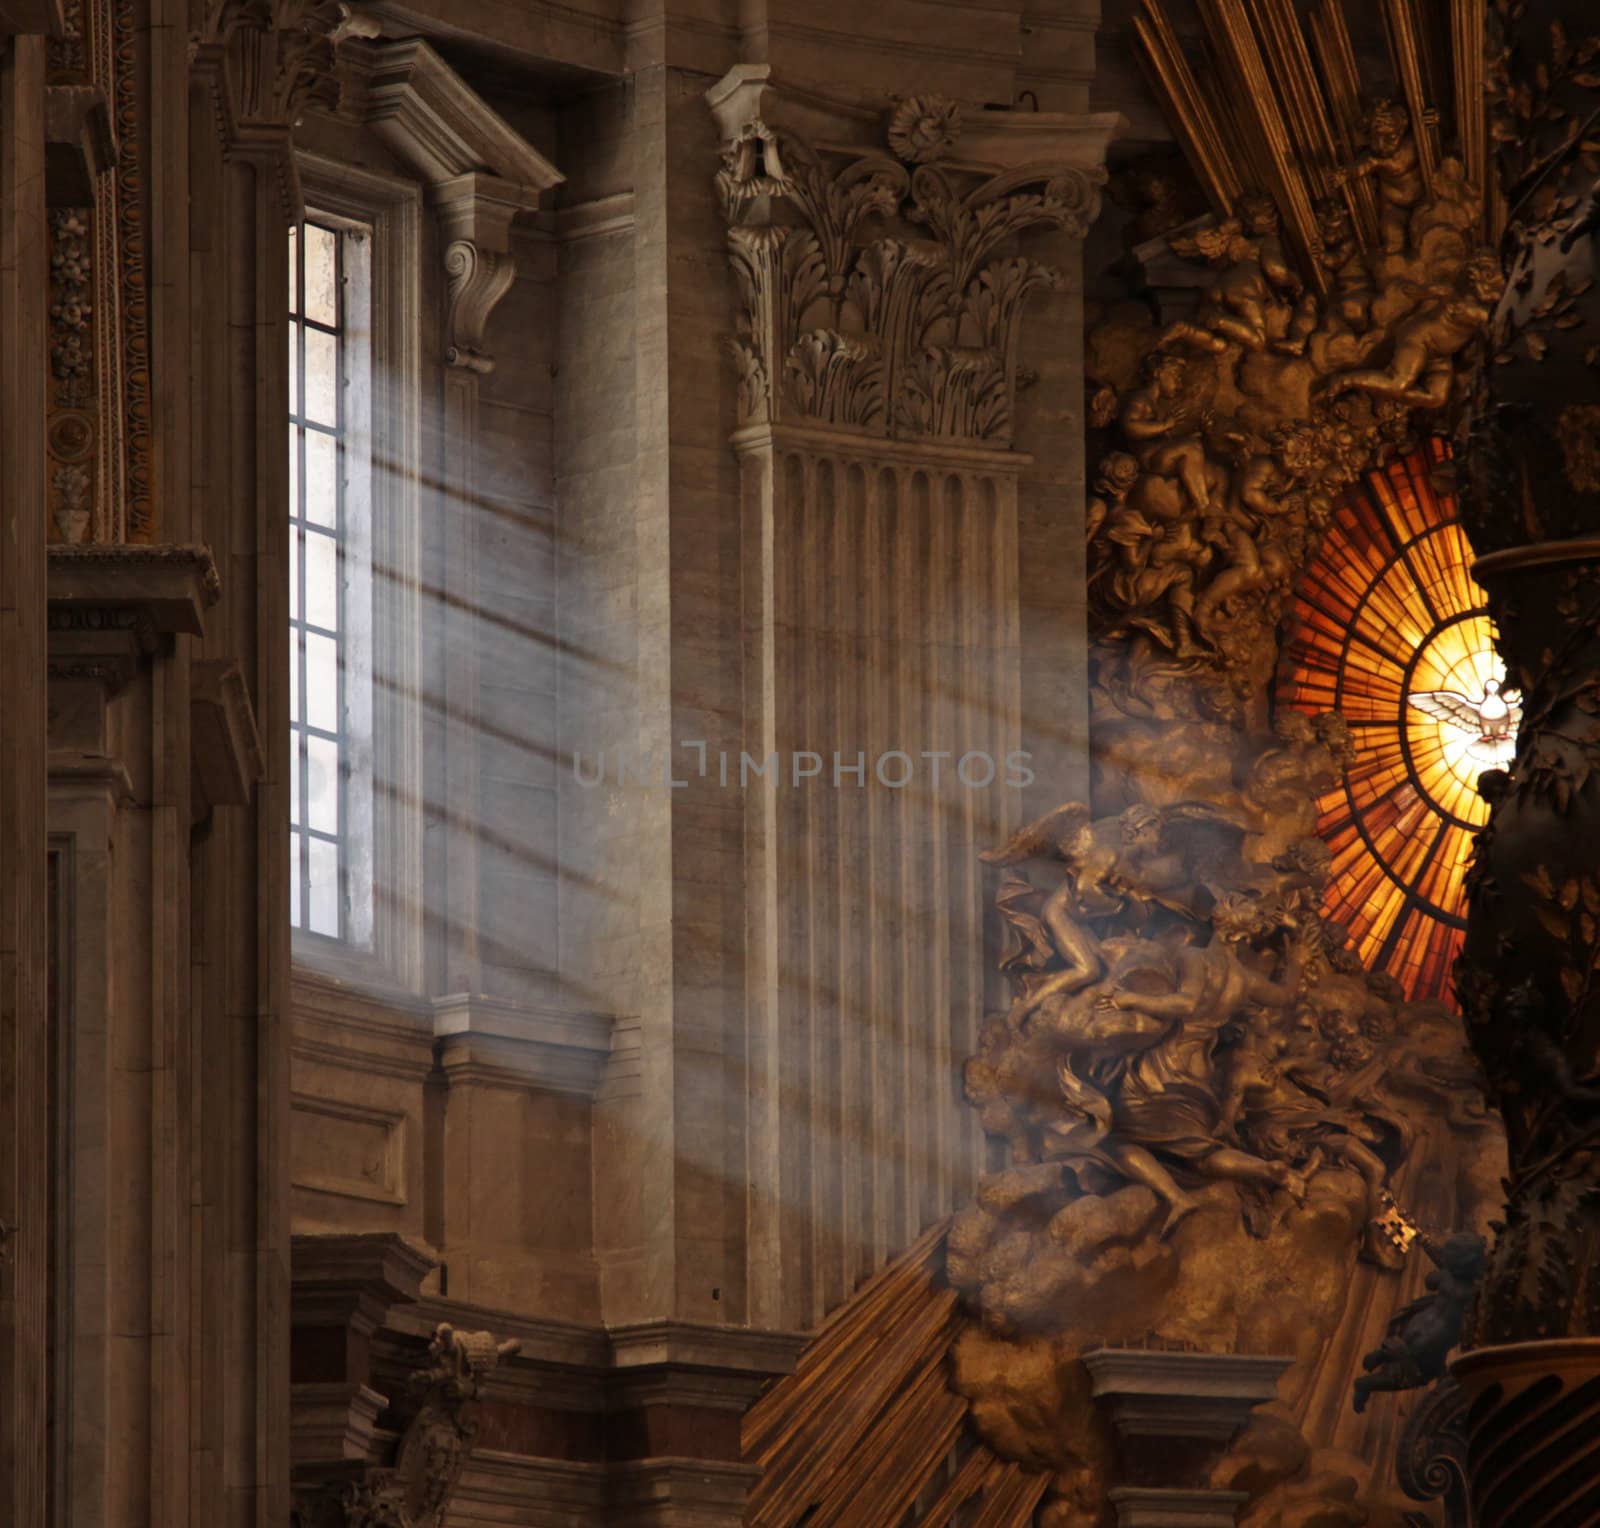 Rays of Light in St. Peter's by ca2hill